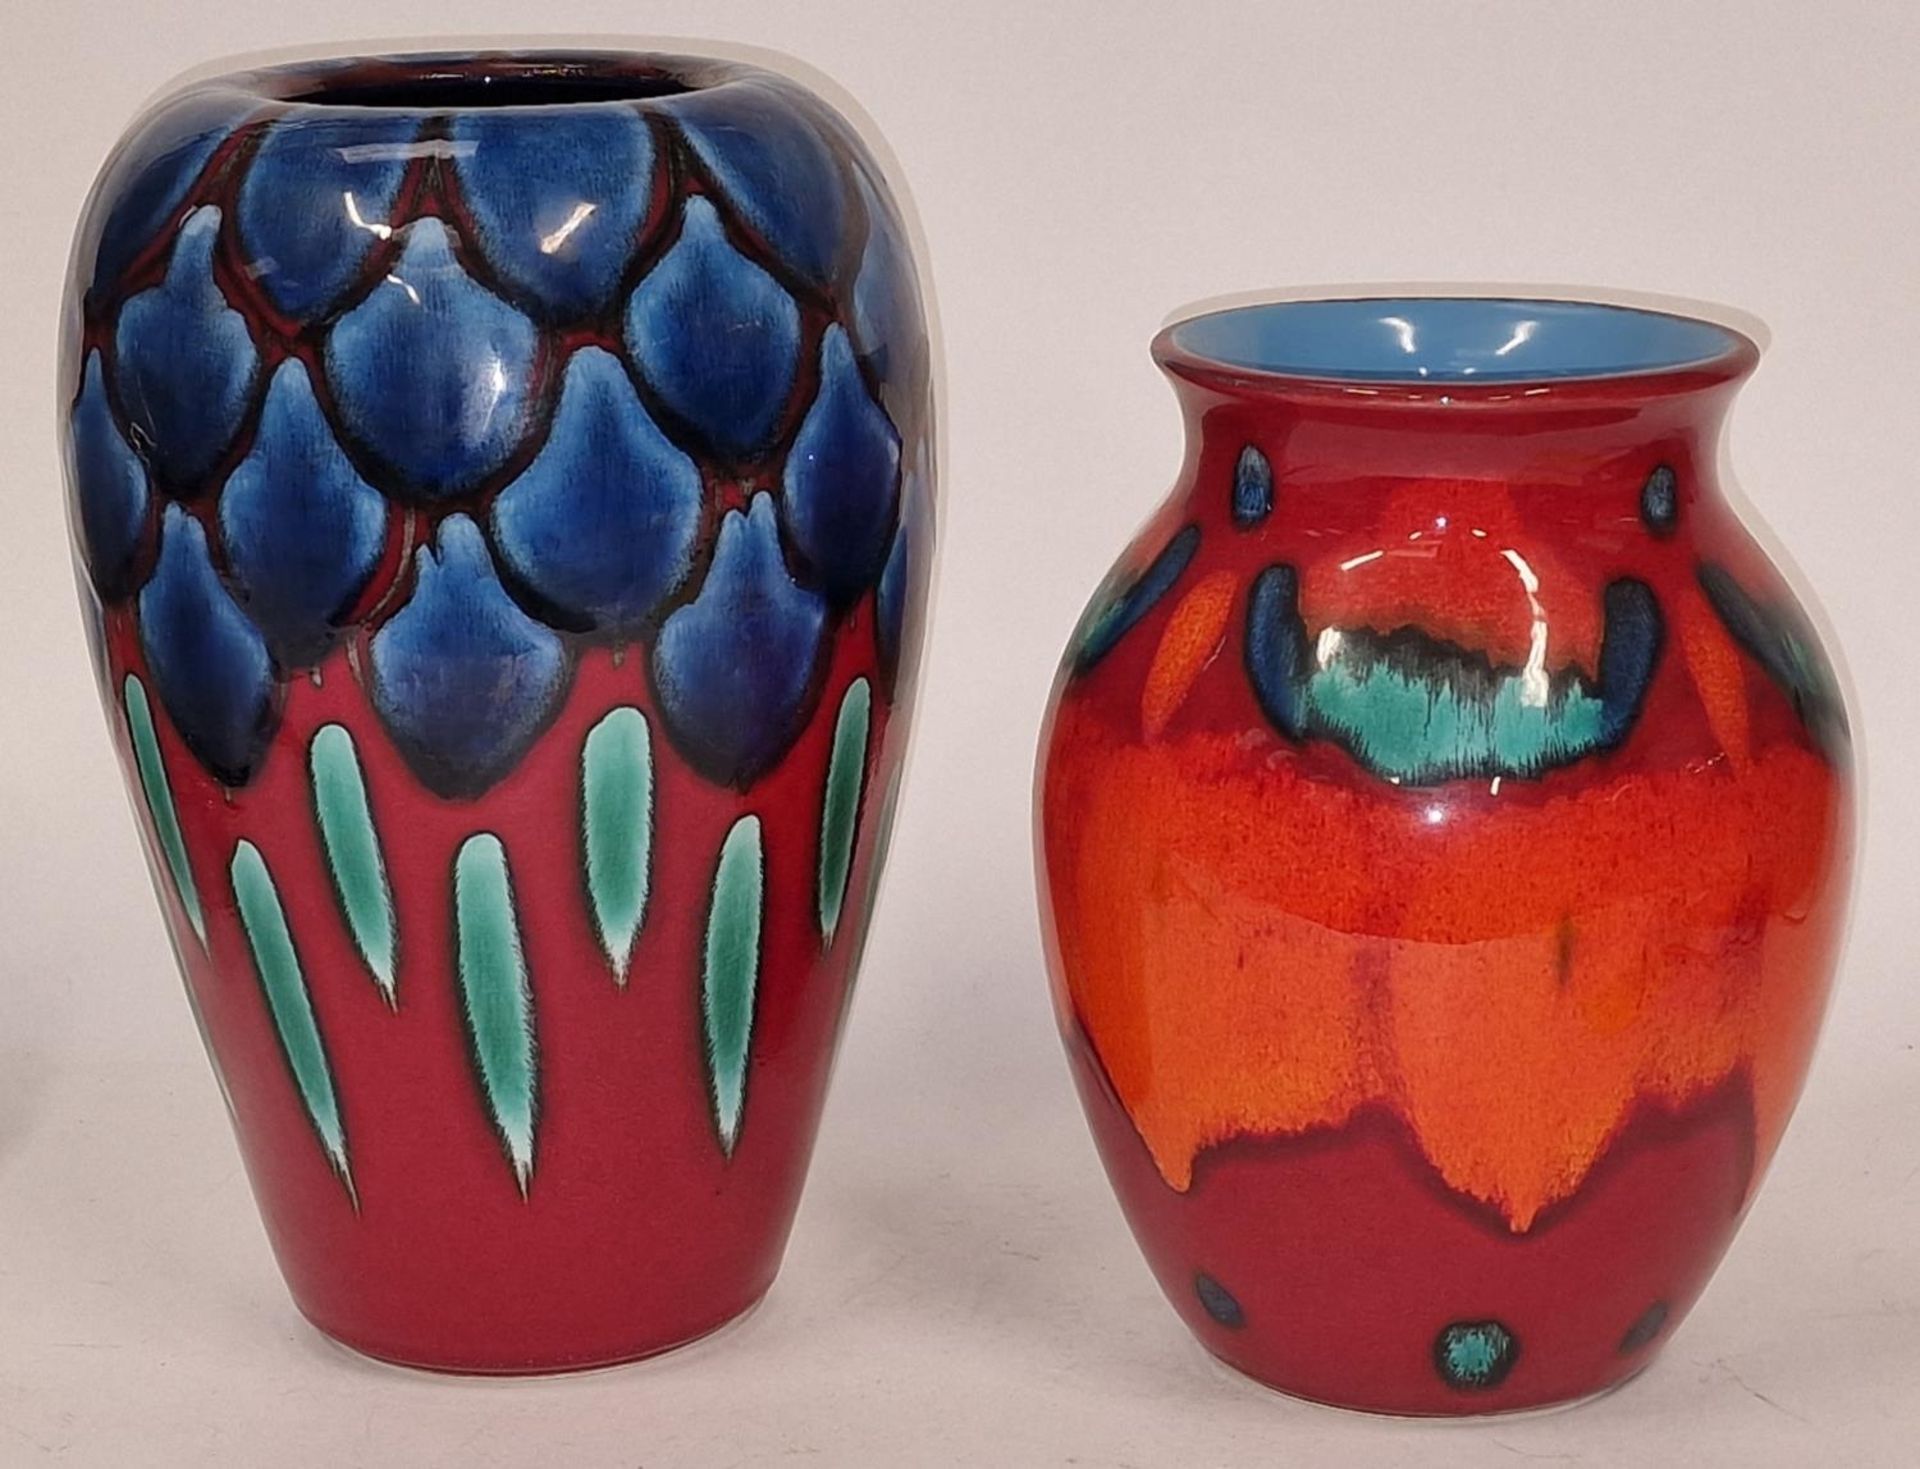 Poole Pottery two living glaze vases the tallest being a Trial 26cm in height.